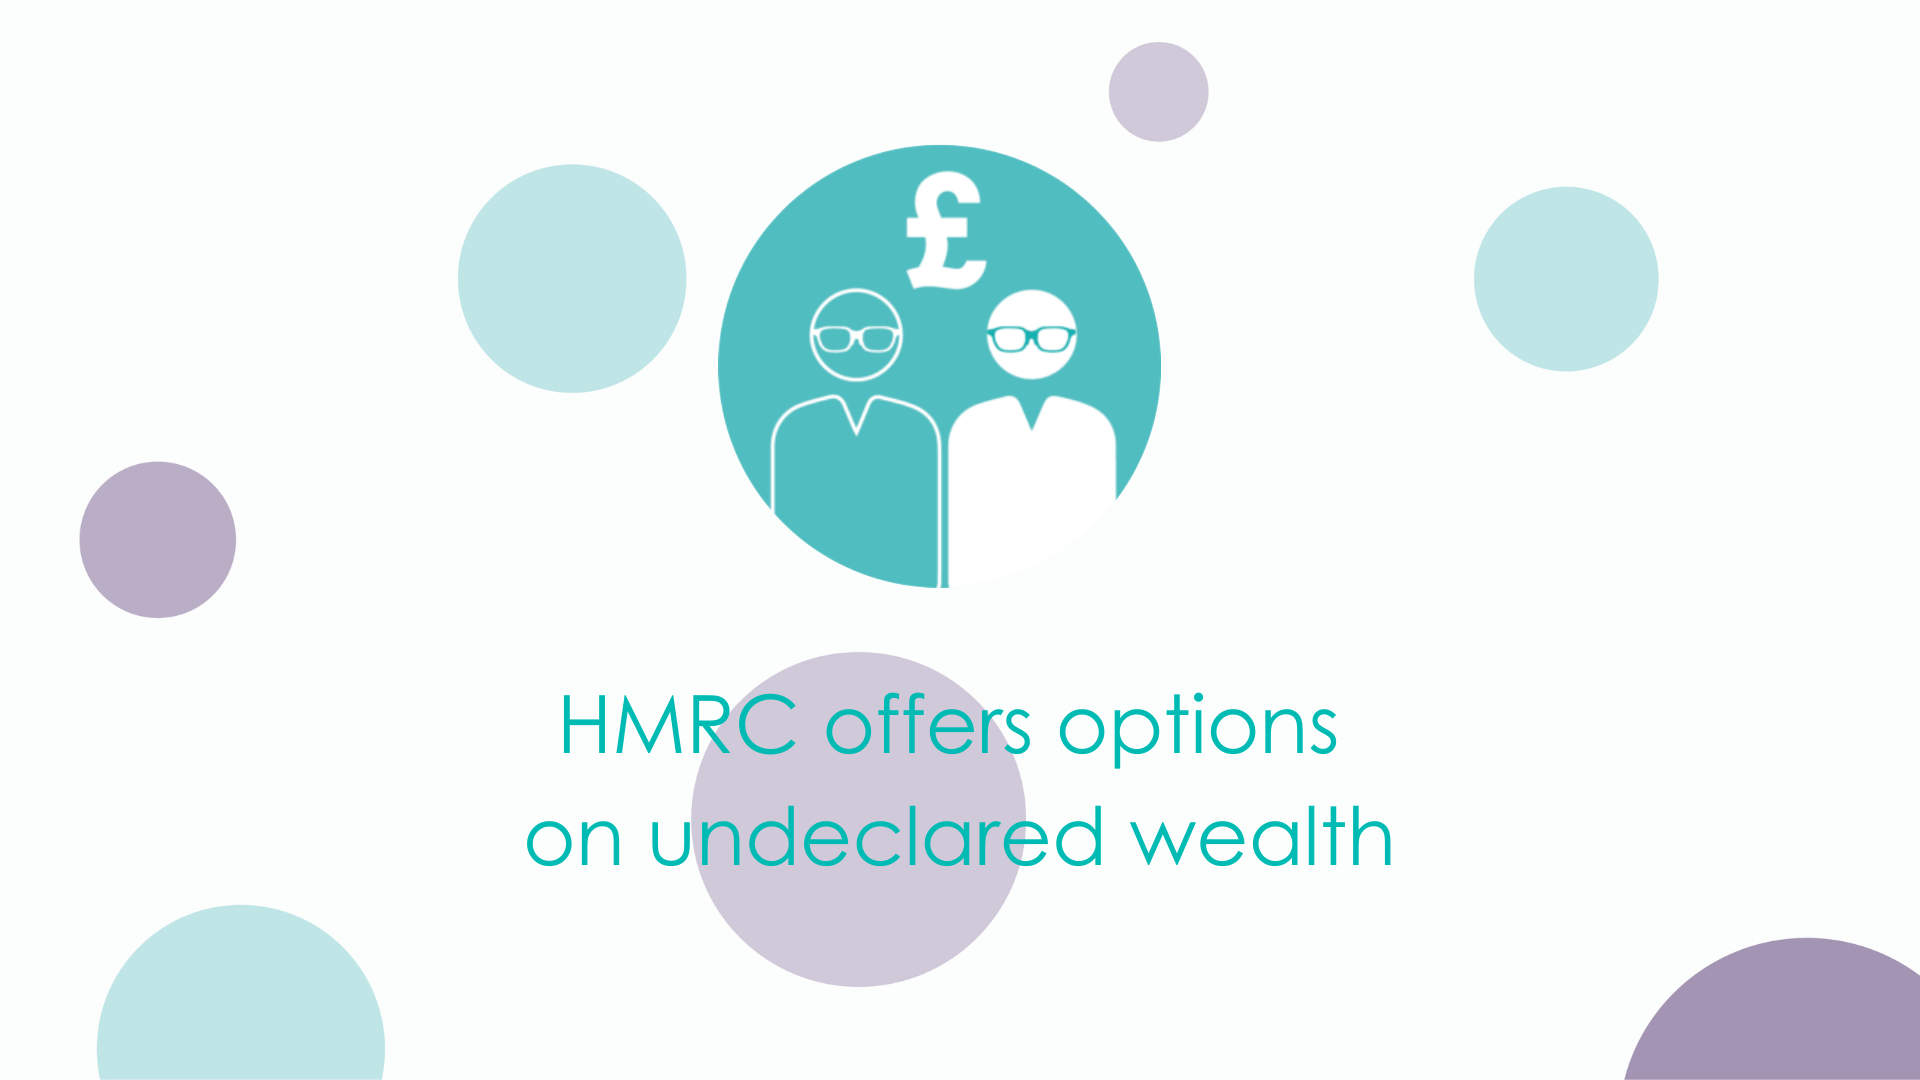 HMRC offers options on undeclared wealth